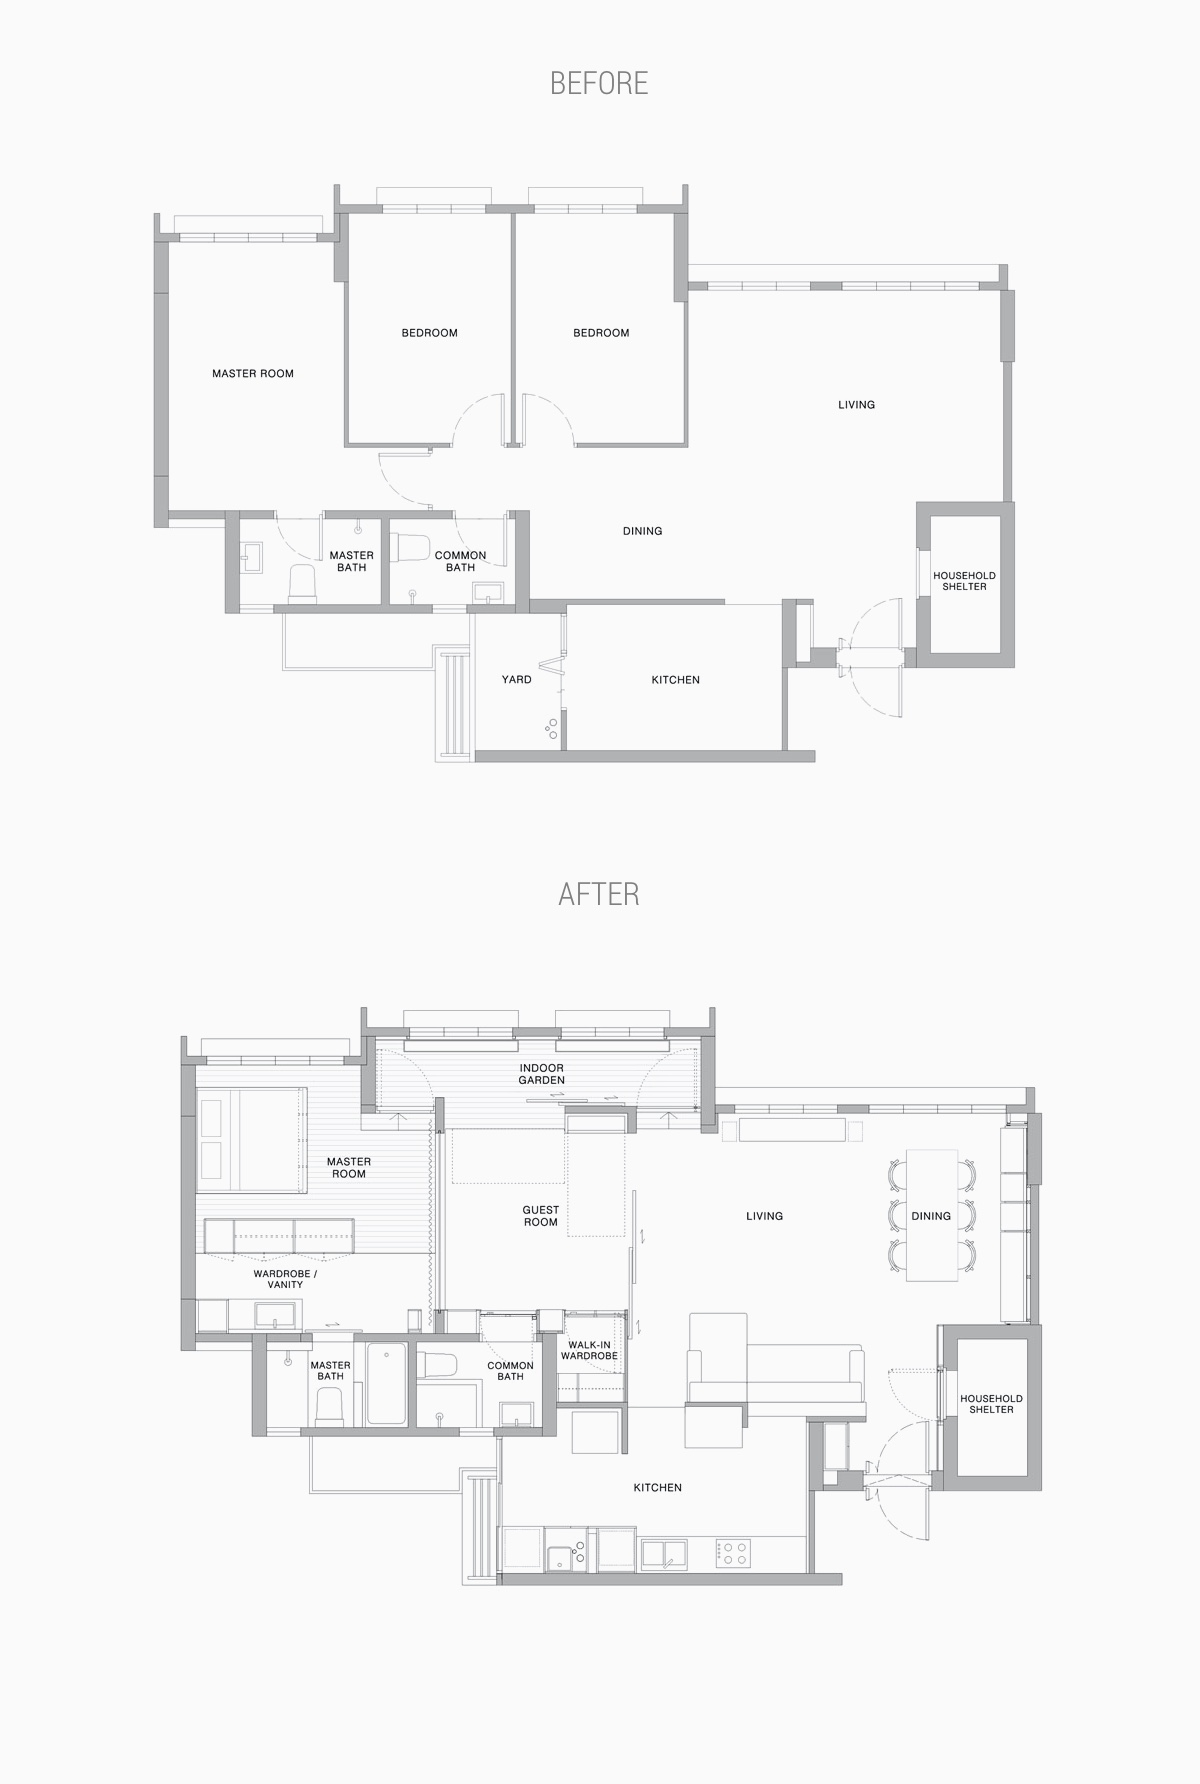 before-and-after-floor-plan-600x892.jpg